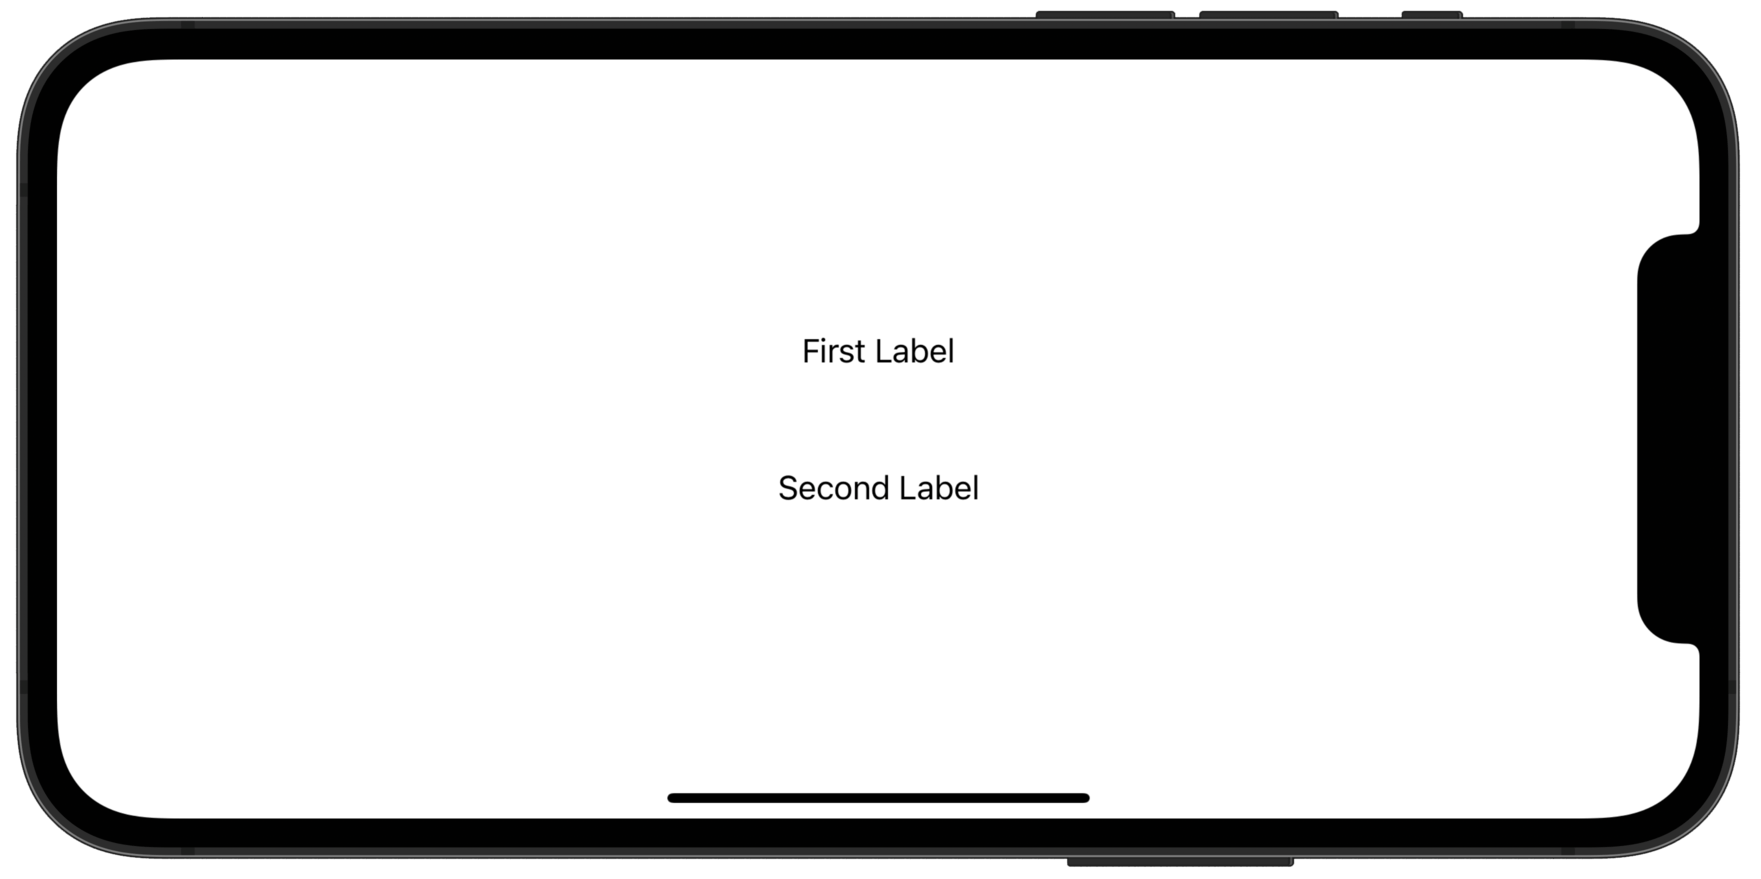 A phone showing the text “First Label” some distance above the text “Second Label”.